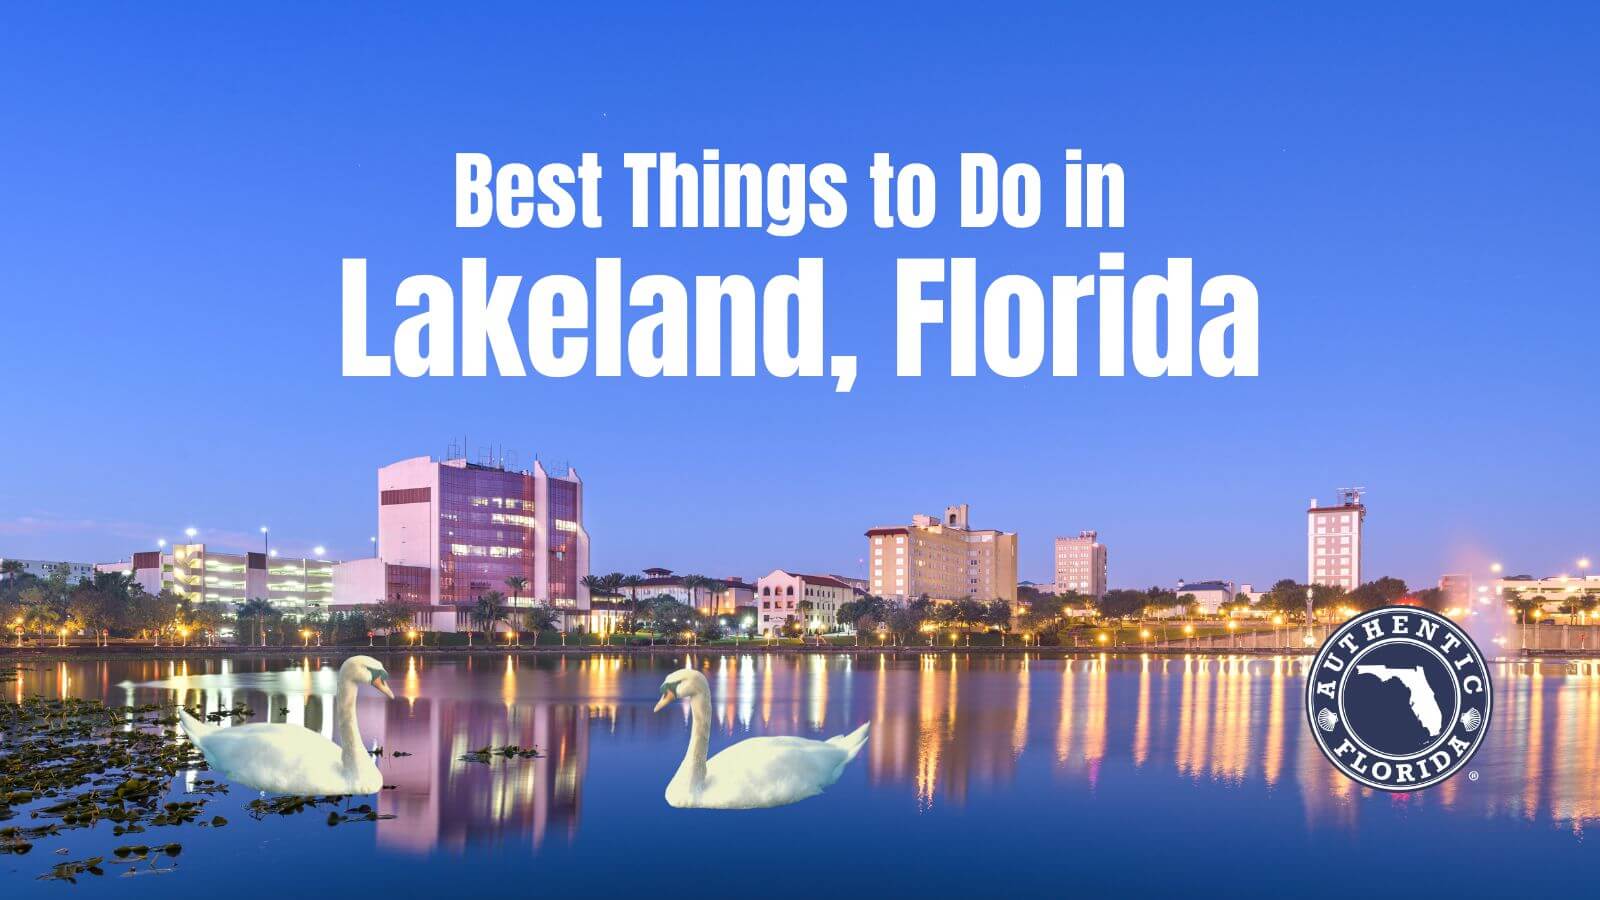 Best things to do in Lakeland, Florida.